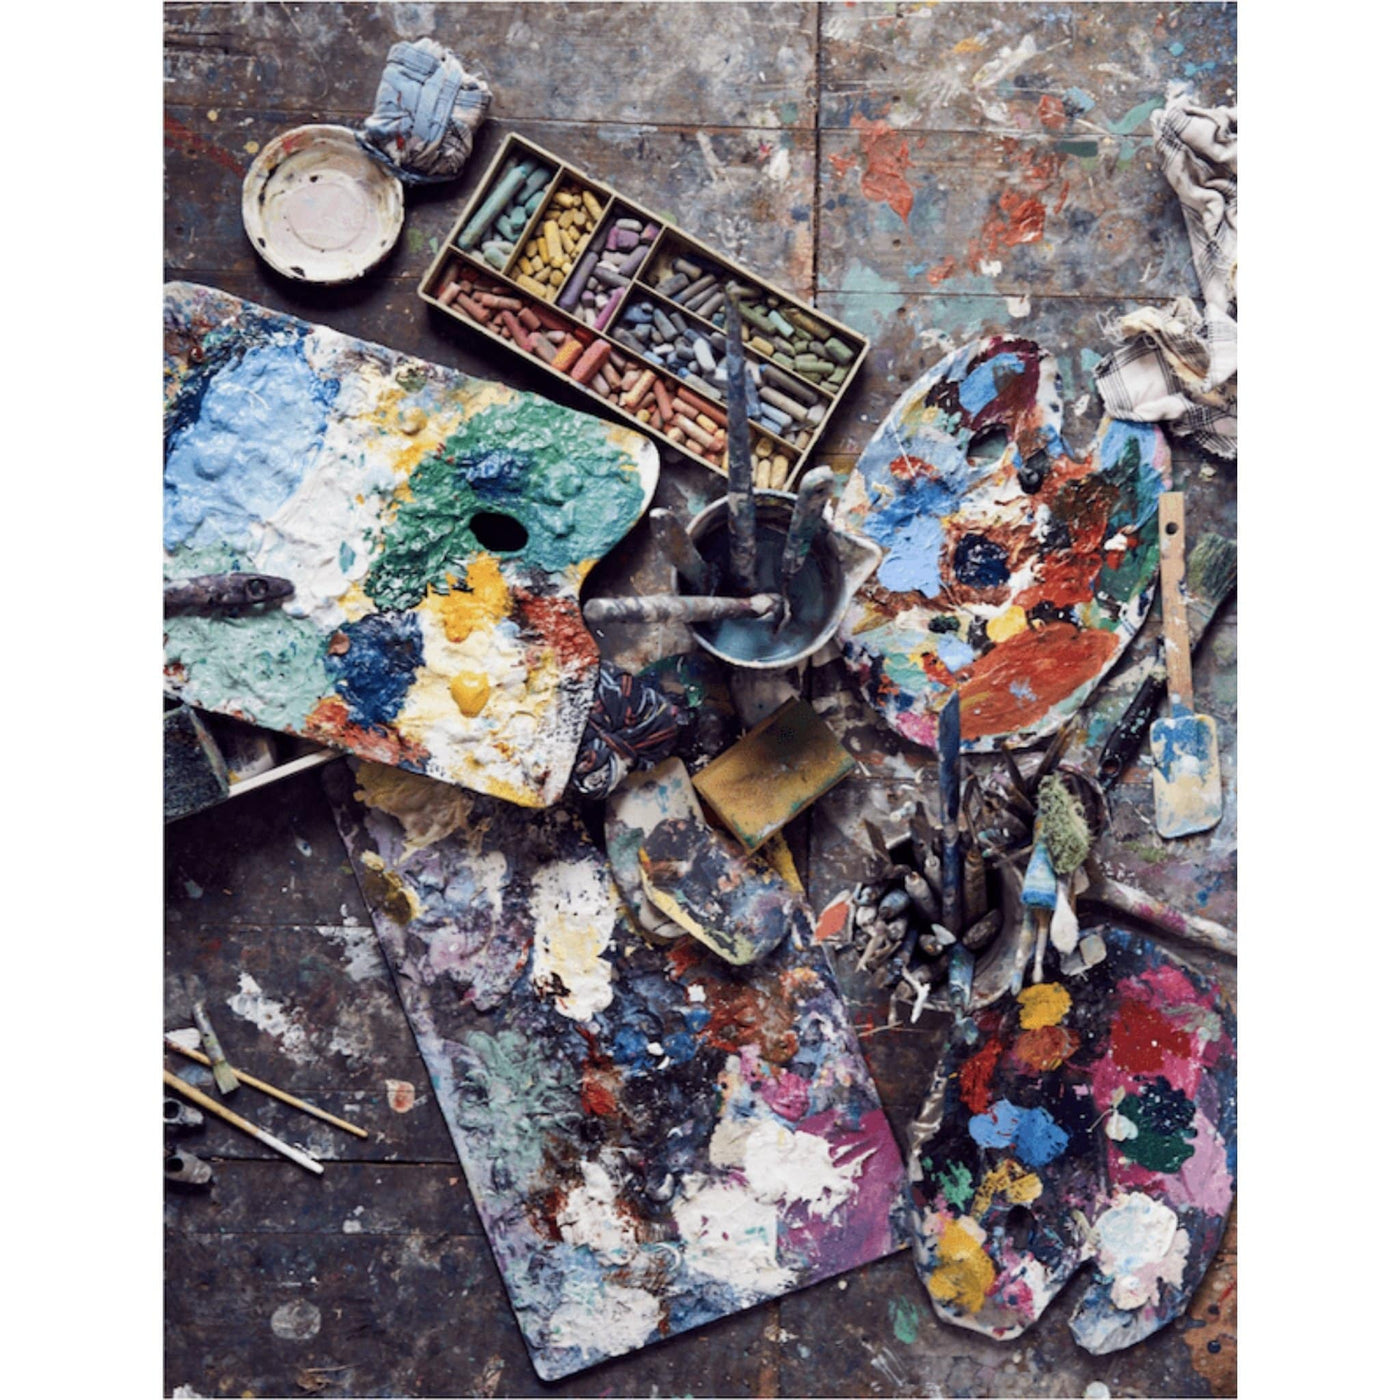 A photo of artists paint palettes on the floor along with tools, bruses and pastels.